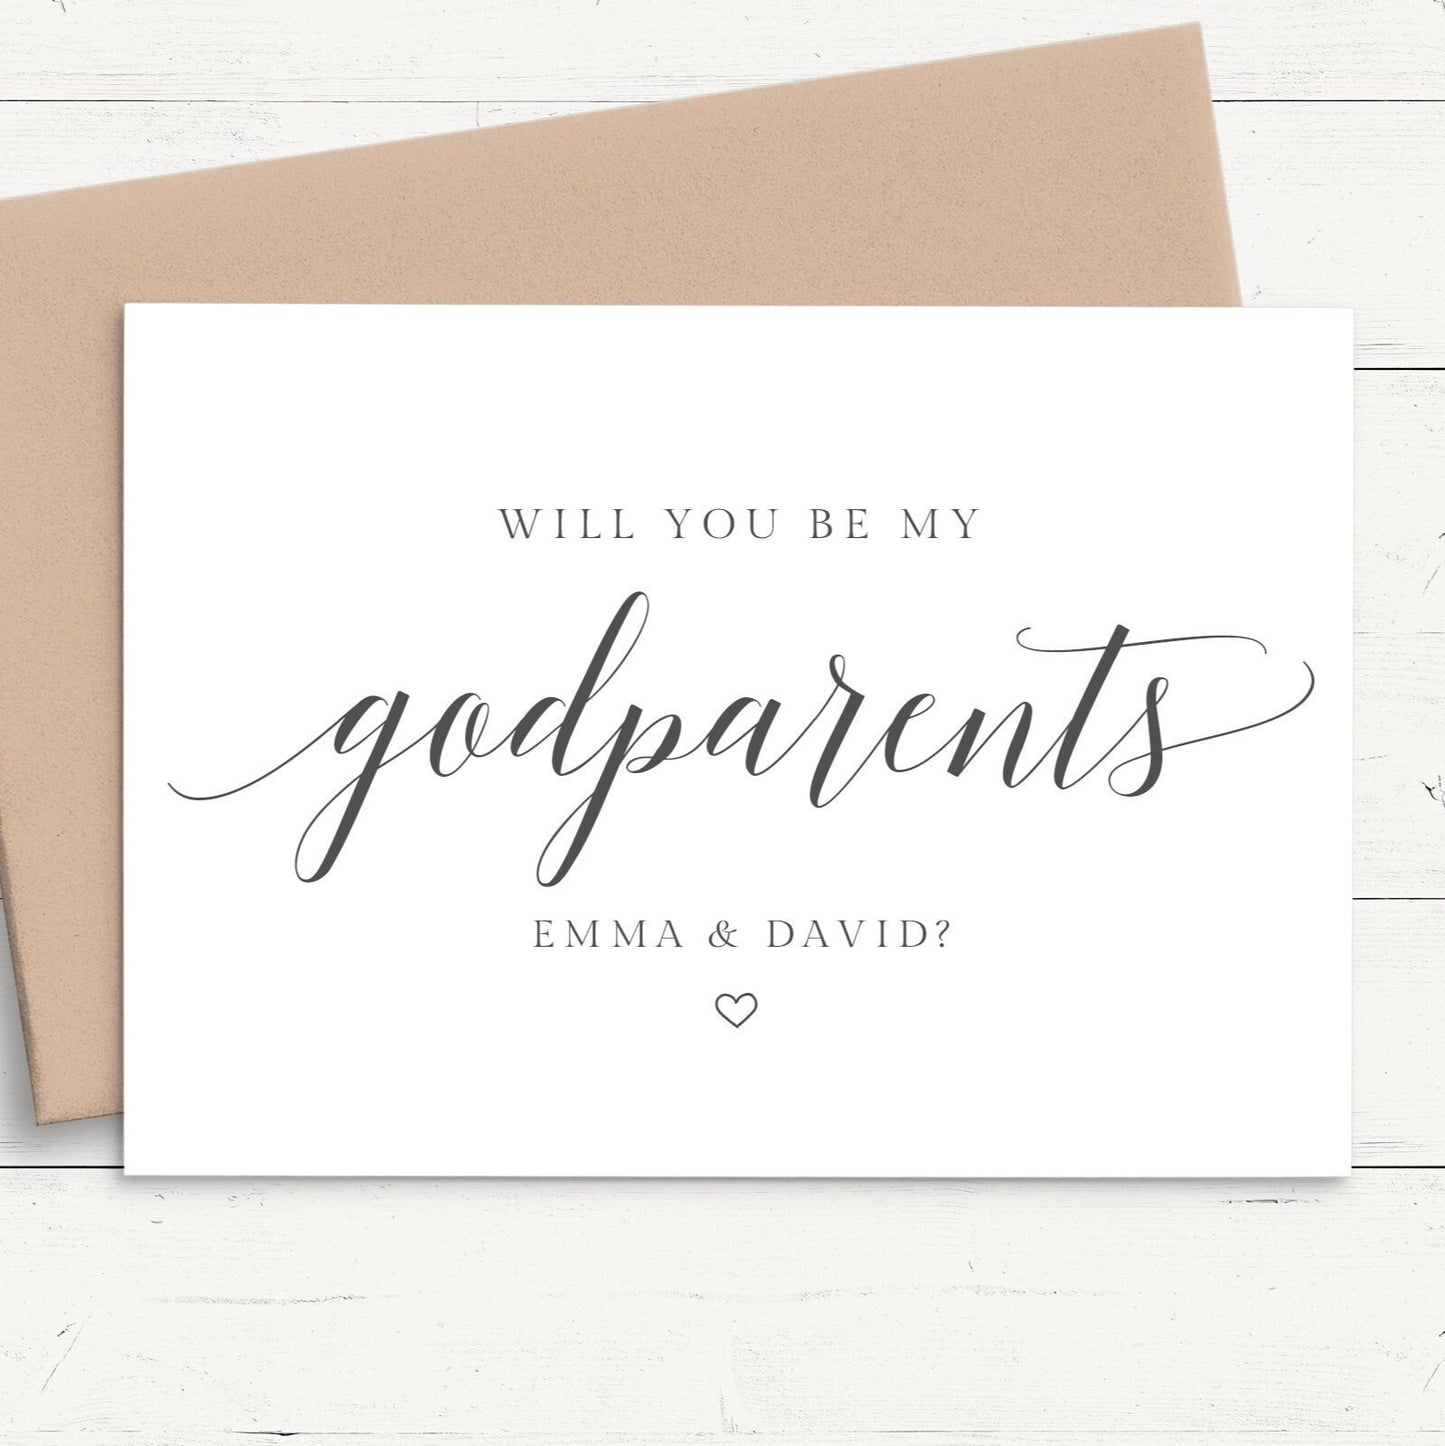 Will You Be My Godparents Card Personalised, Minimalist Design